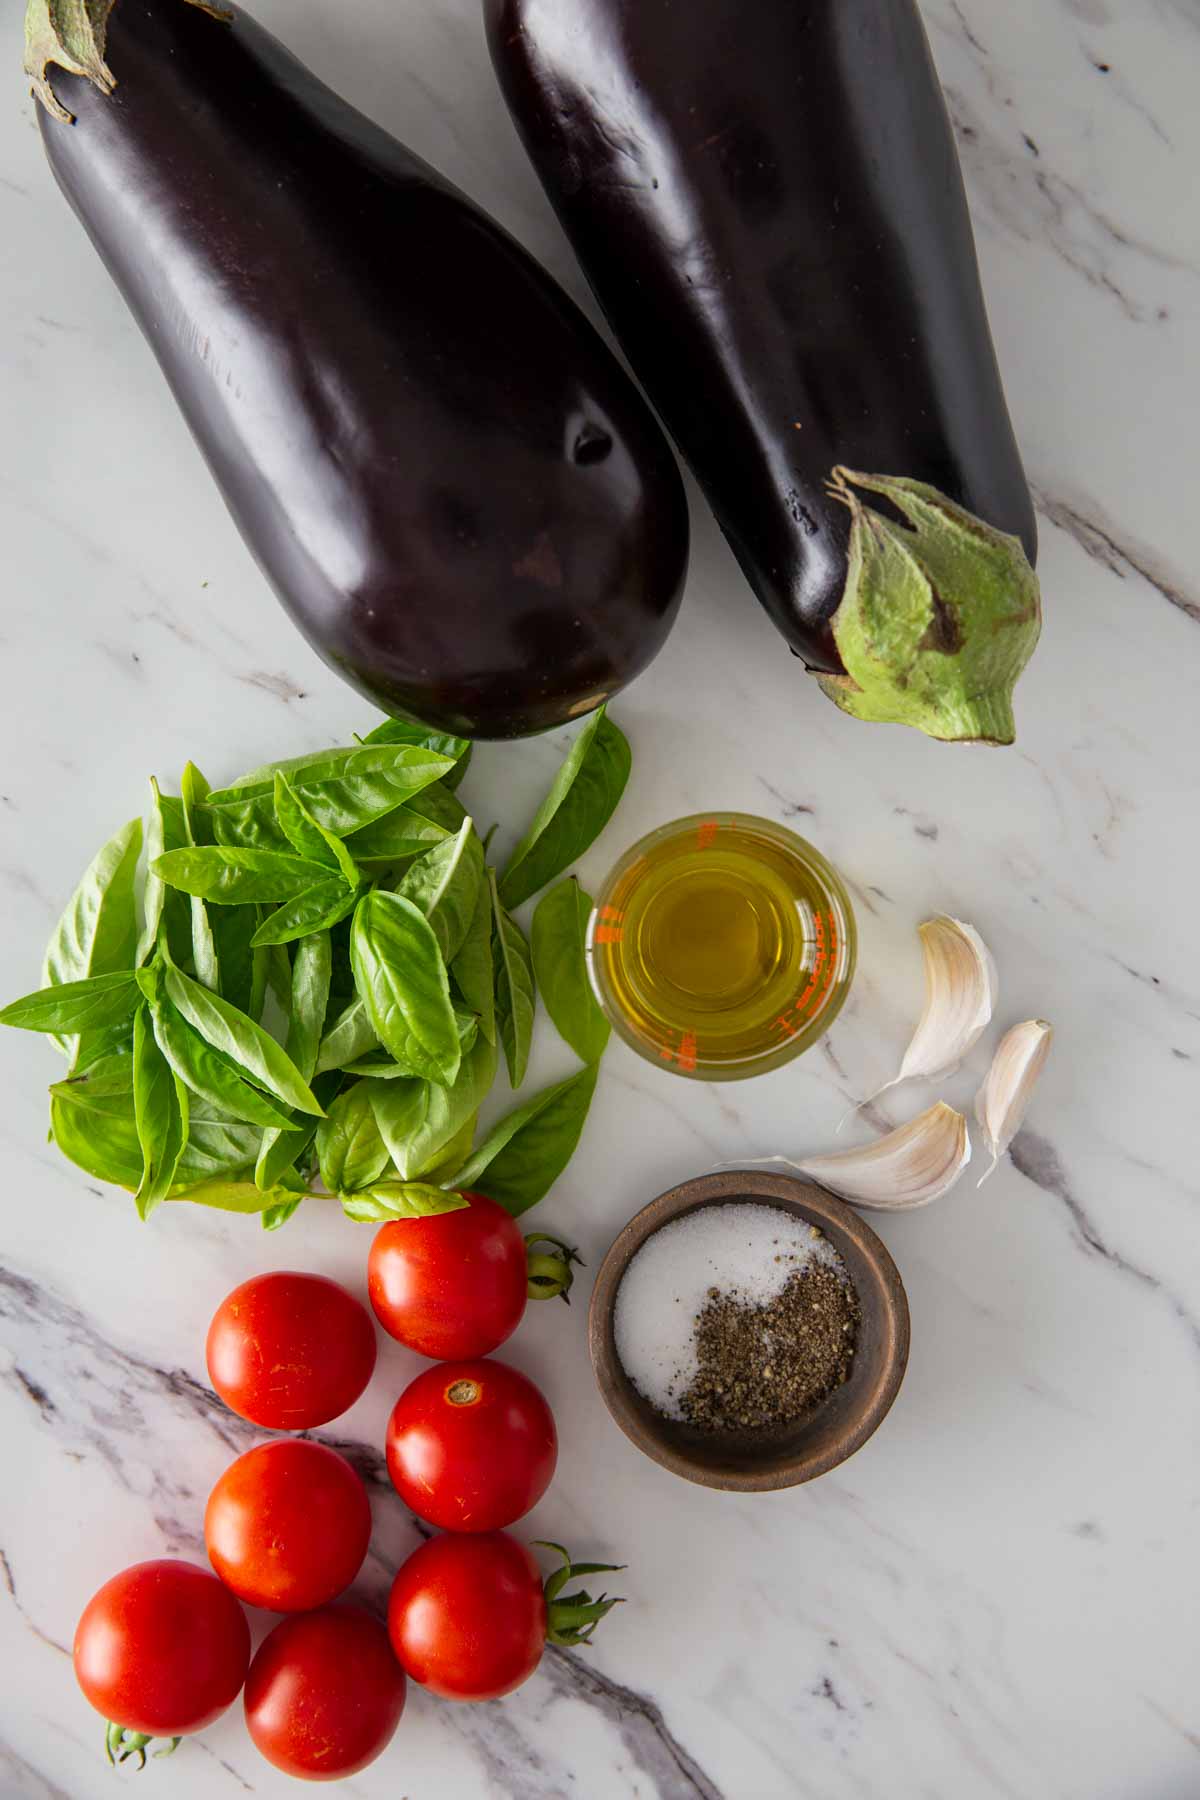 Fresh ingredients, such as eggplant, cherry tomatoes, garlic, basil, seasonings, and oil, are laid out on a flat surface.